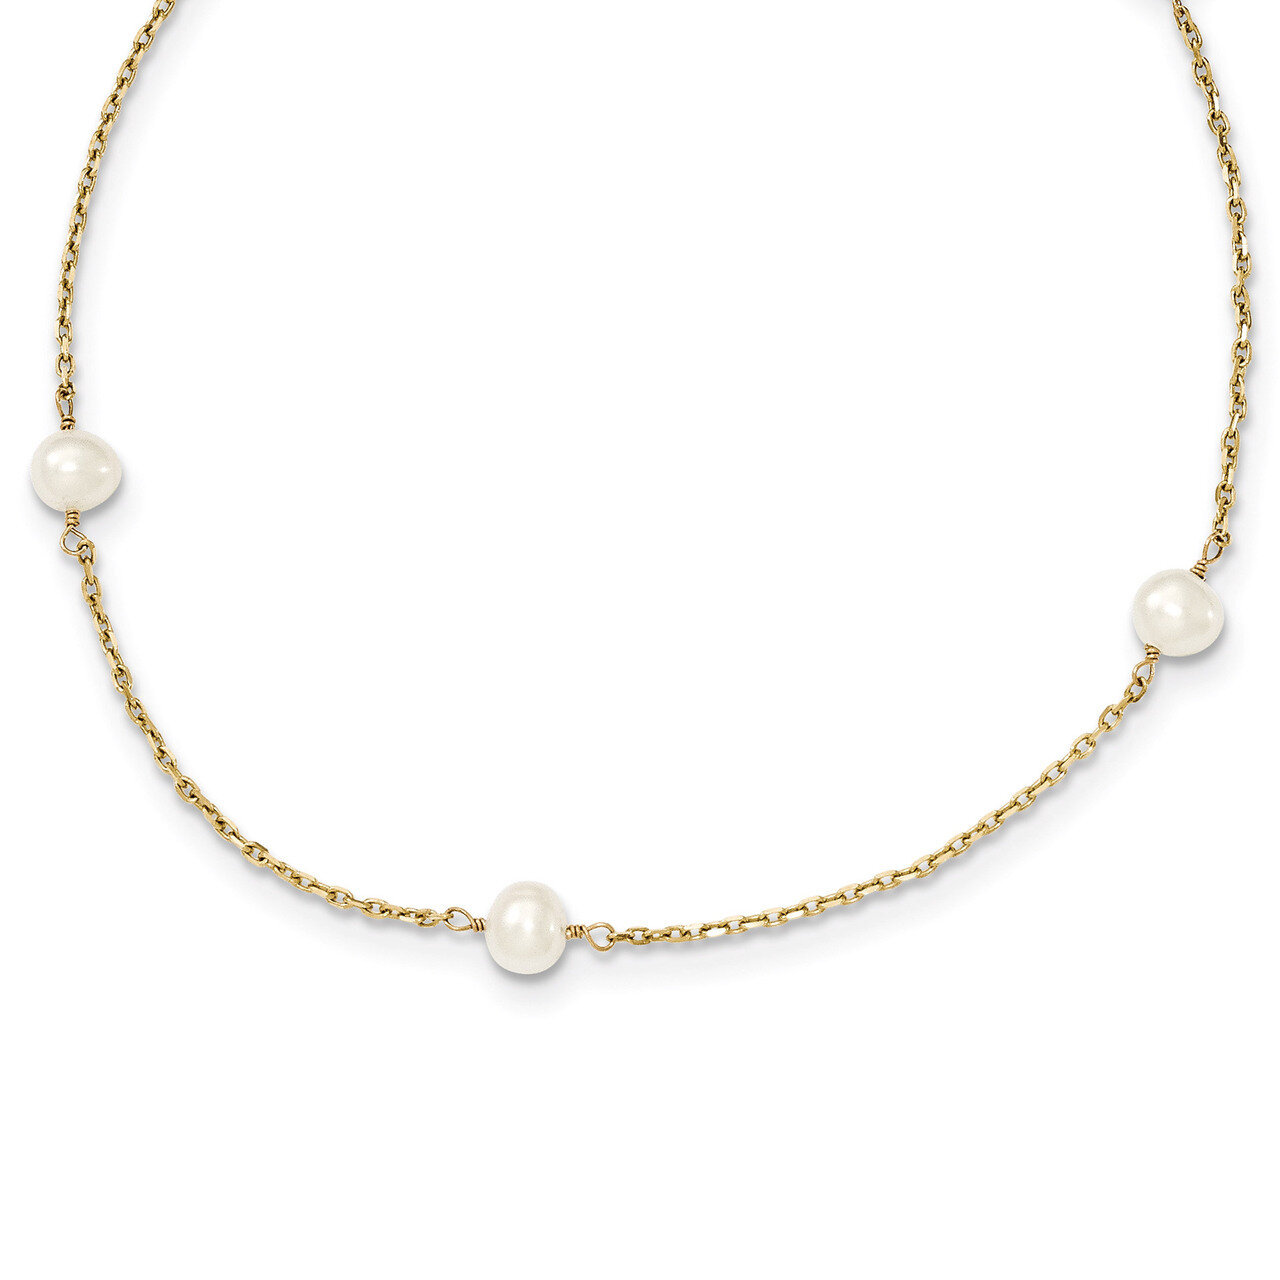 4-4.5mm Cultured Pearl Necklace 16 Inch 14k Gold PR52-16